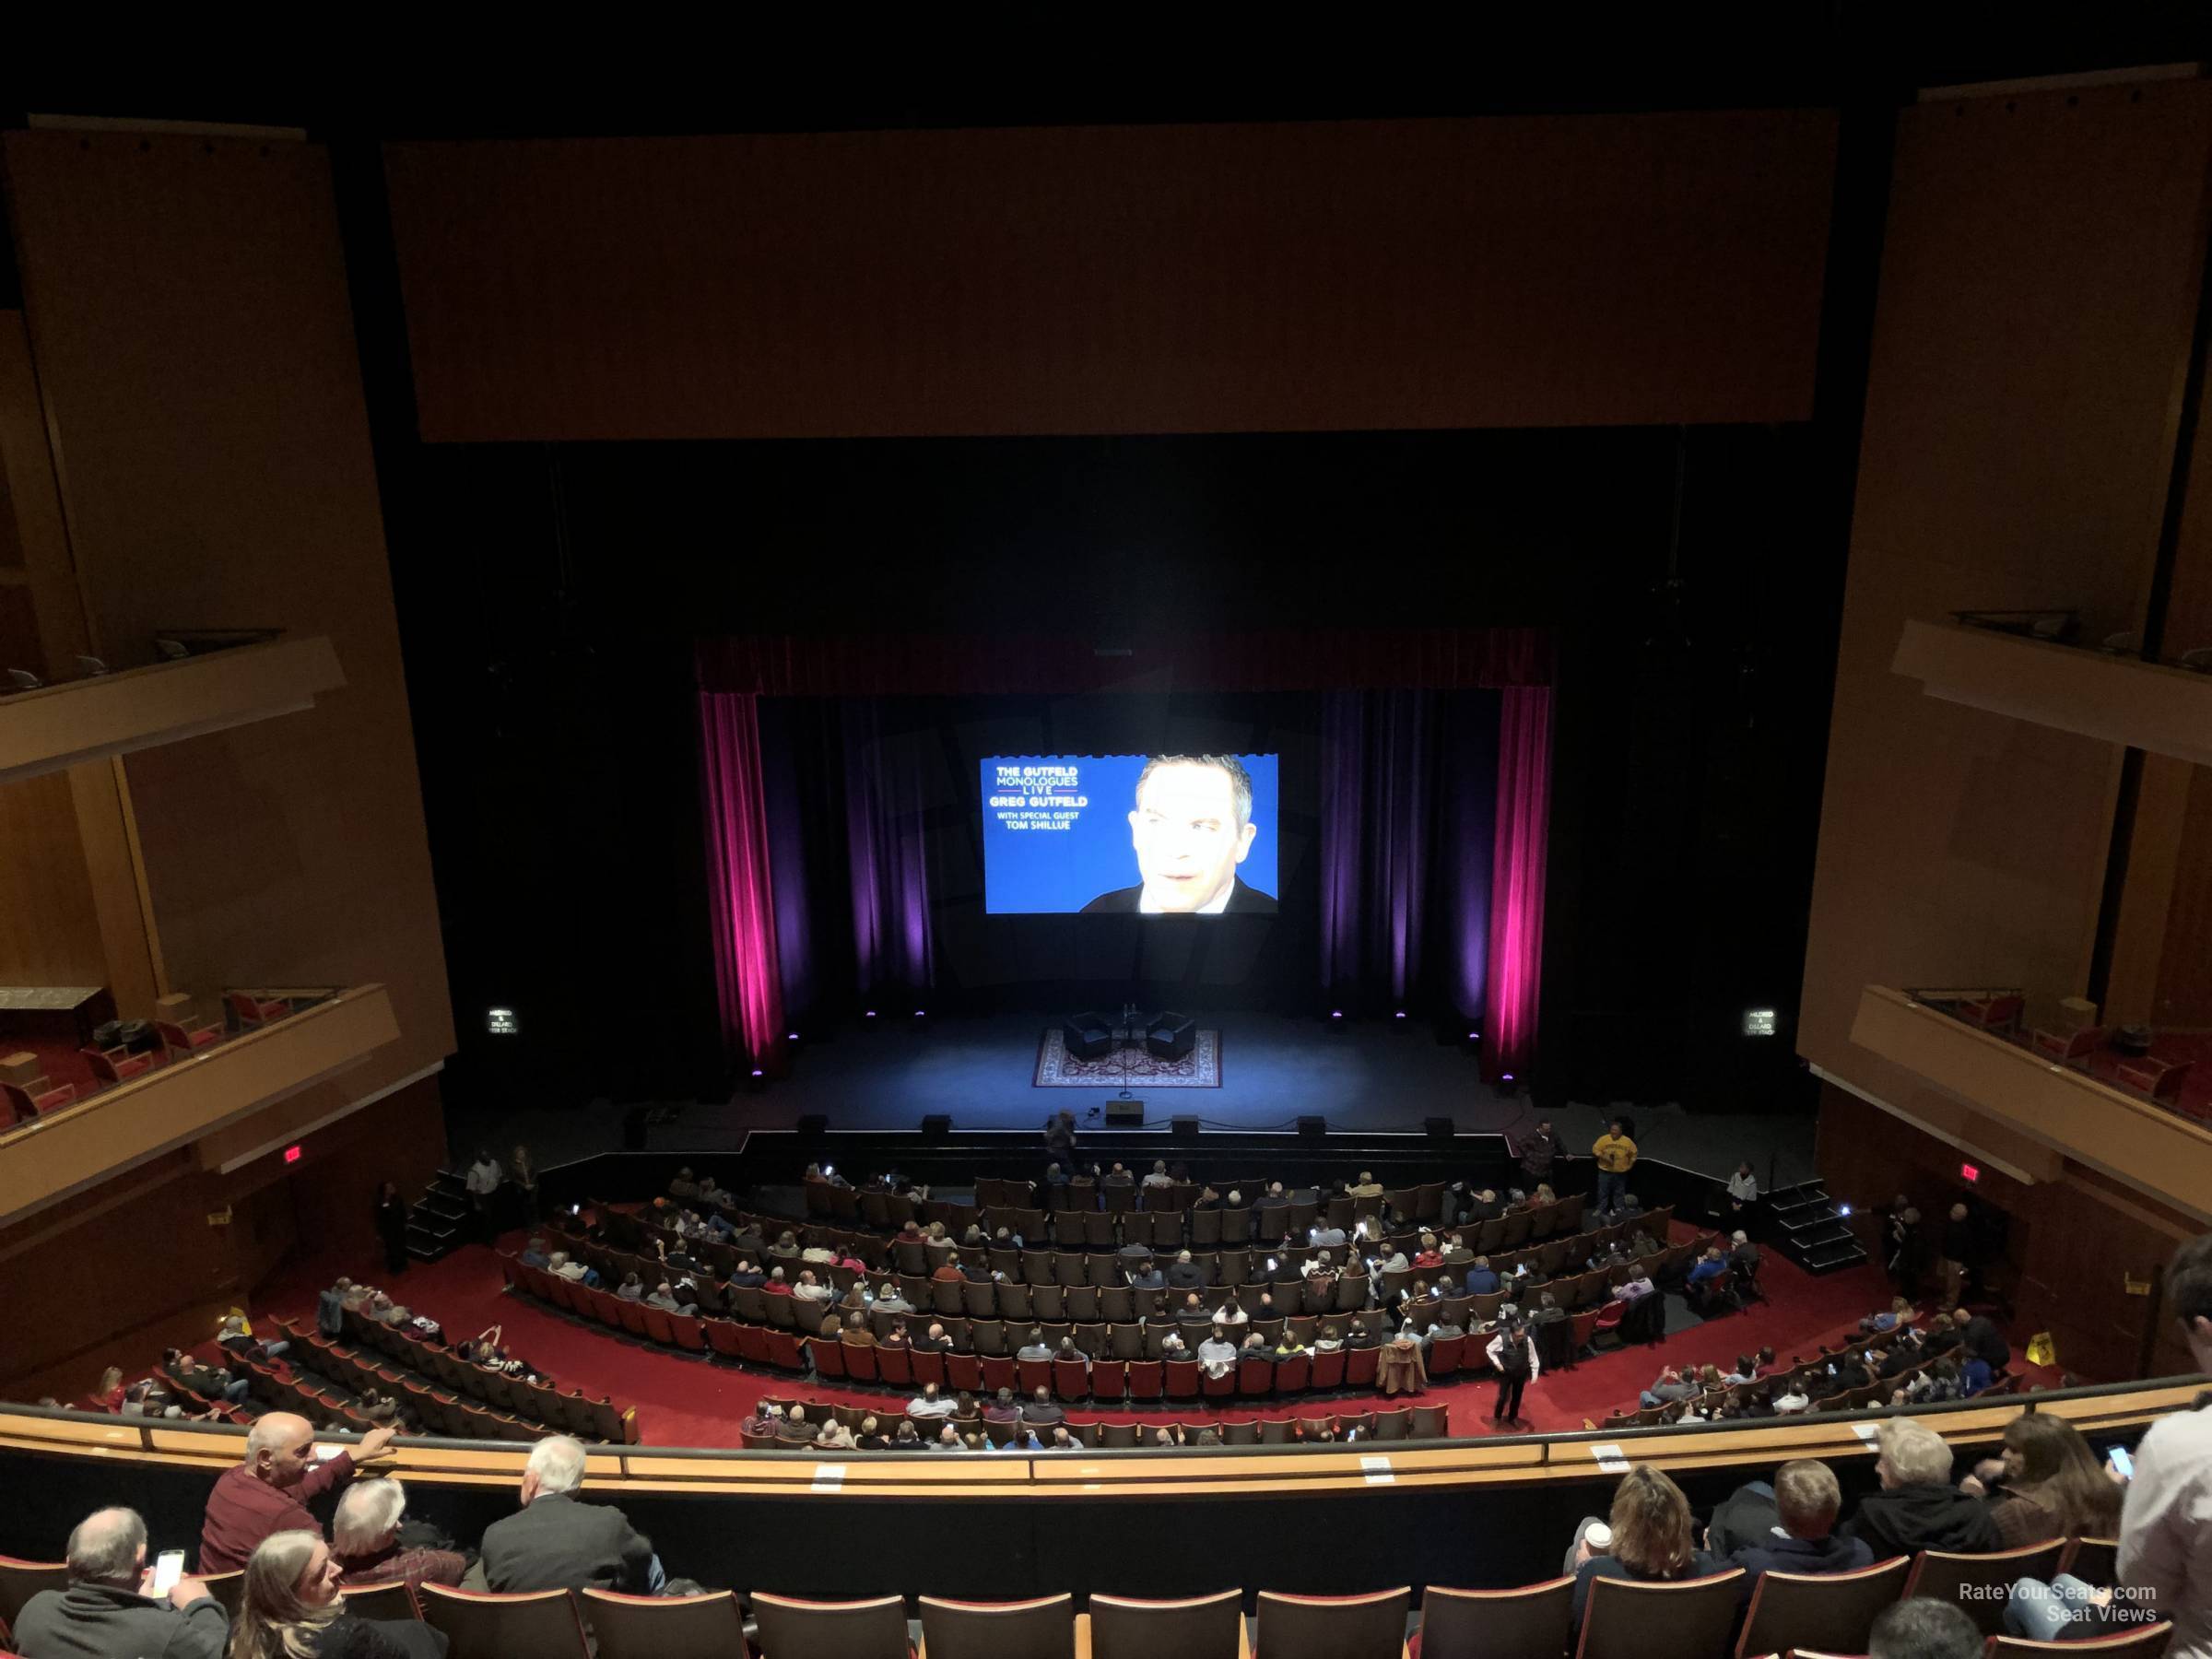 balcony 9, row h seat view  - durham performing arts center